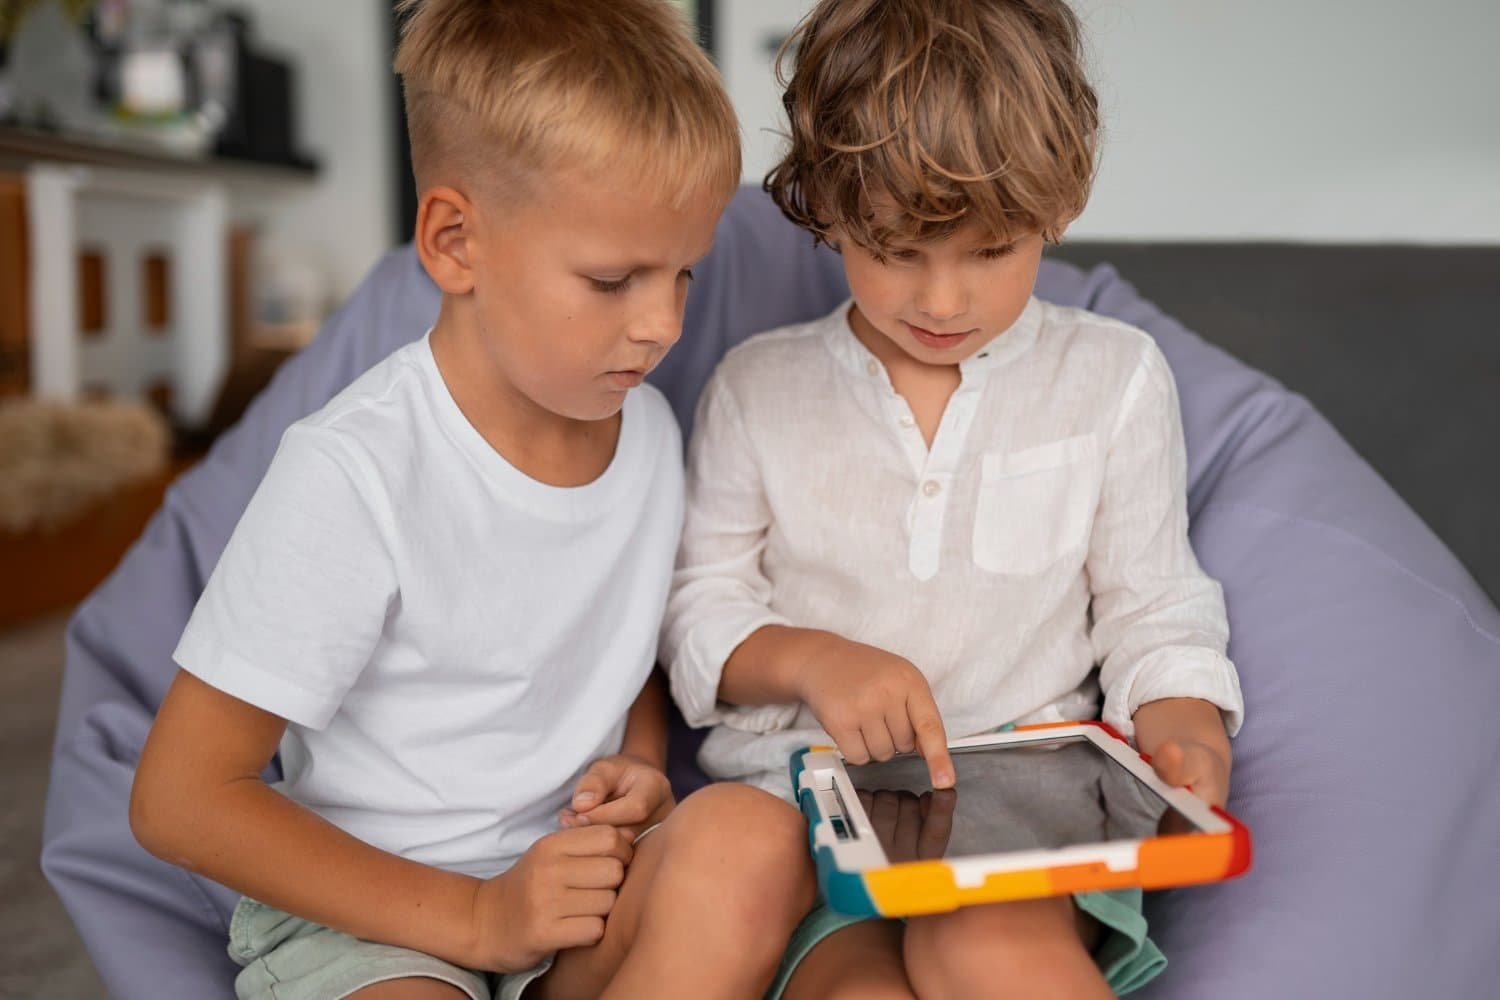 Kids’ Tablets: Finding the Right Device for Educational Use